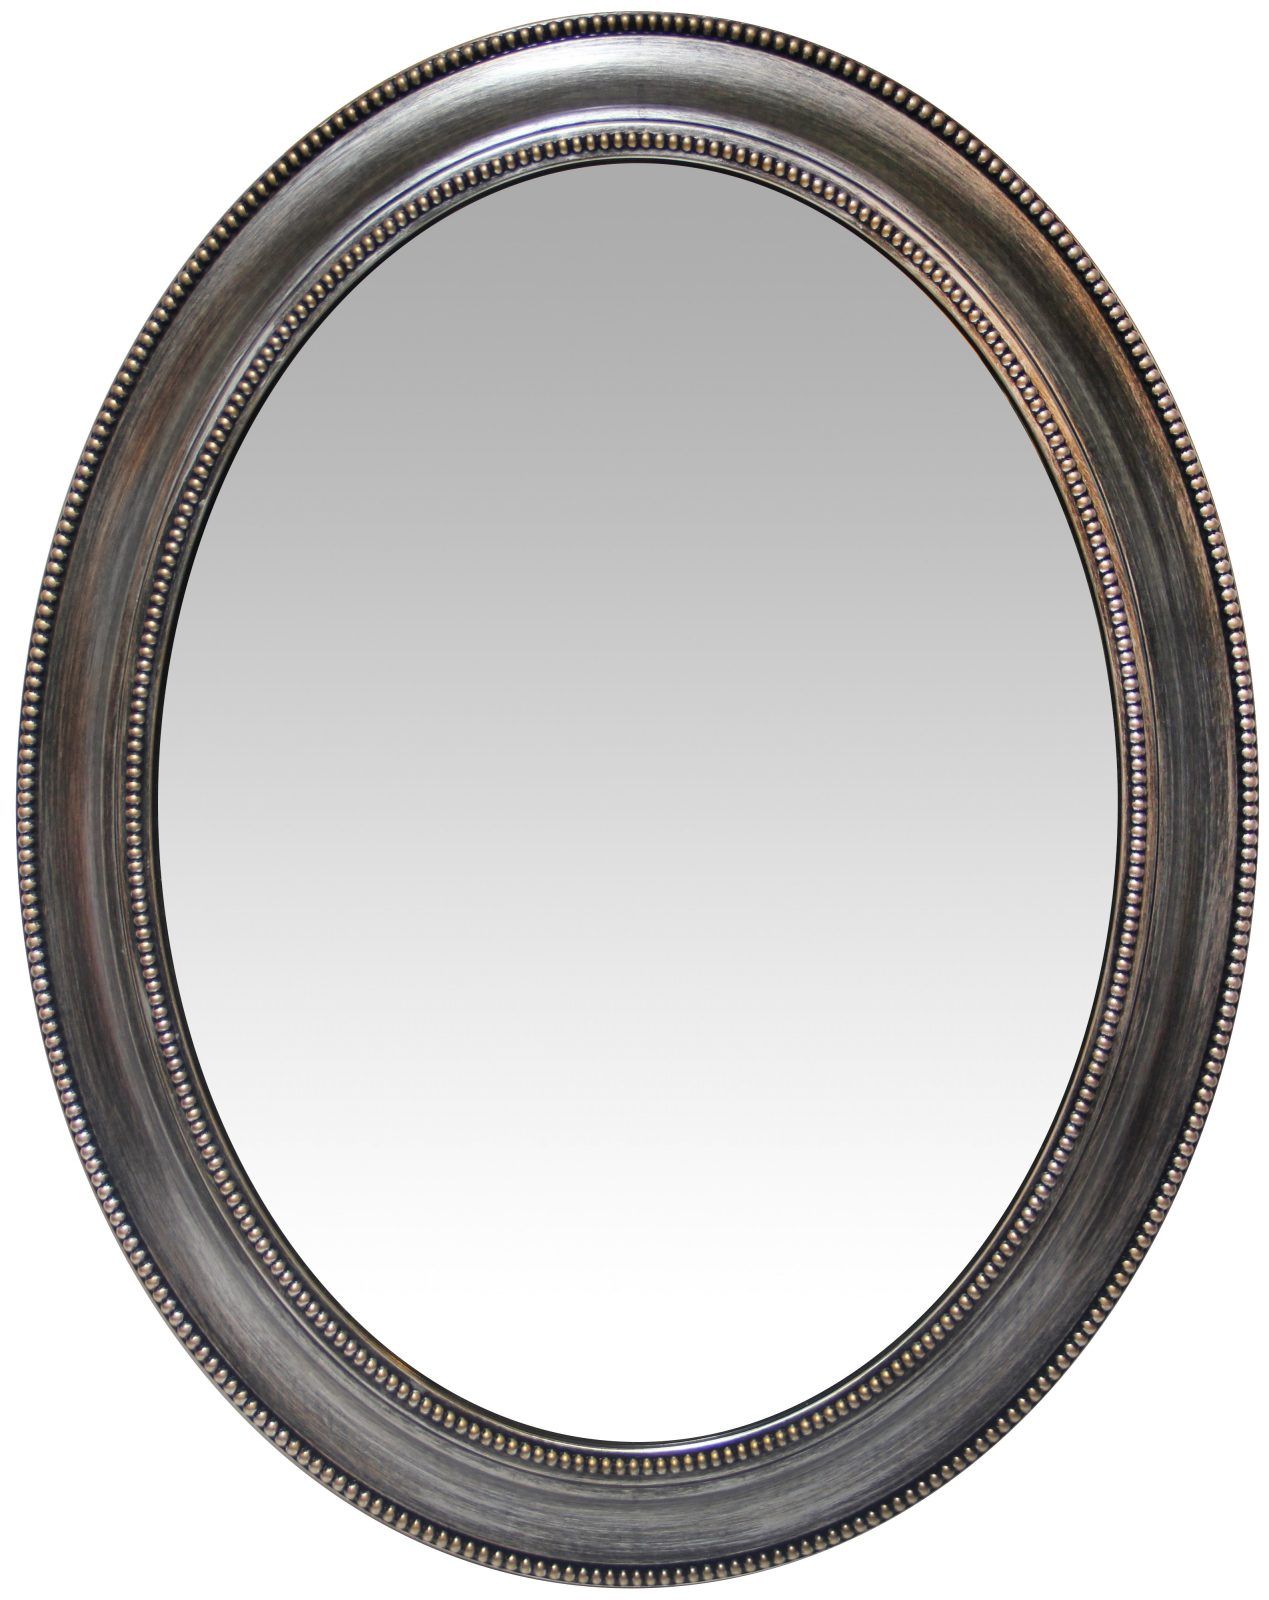 30 Inch Sonore Antique Silver Oval Wall Mirror| Clockroom Inside Antique Silver Round Wall Mirrors (View 15 of 15)